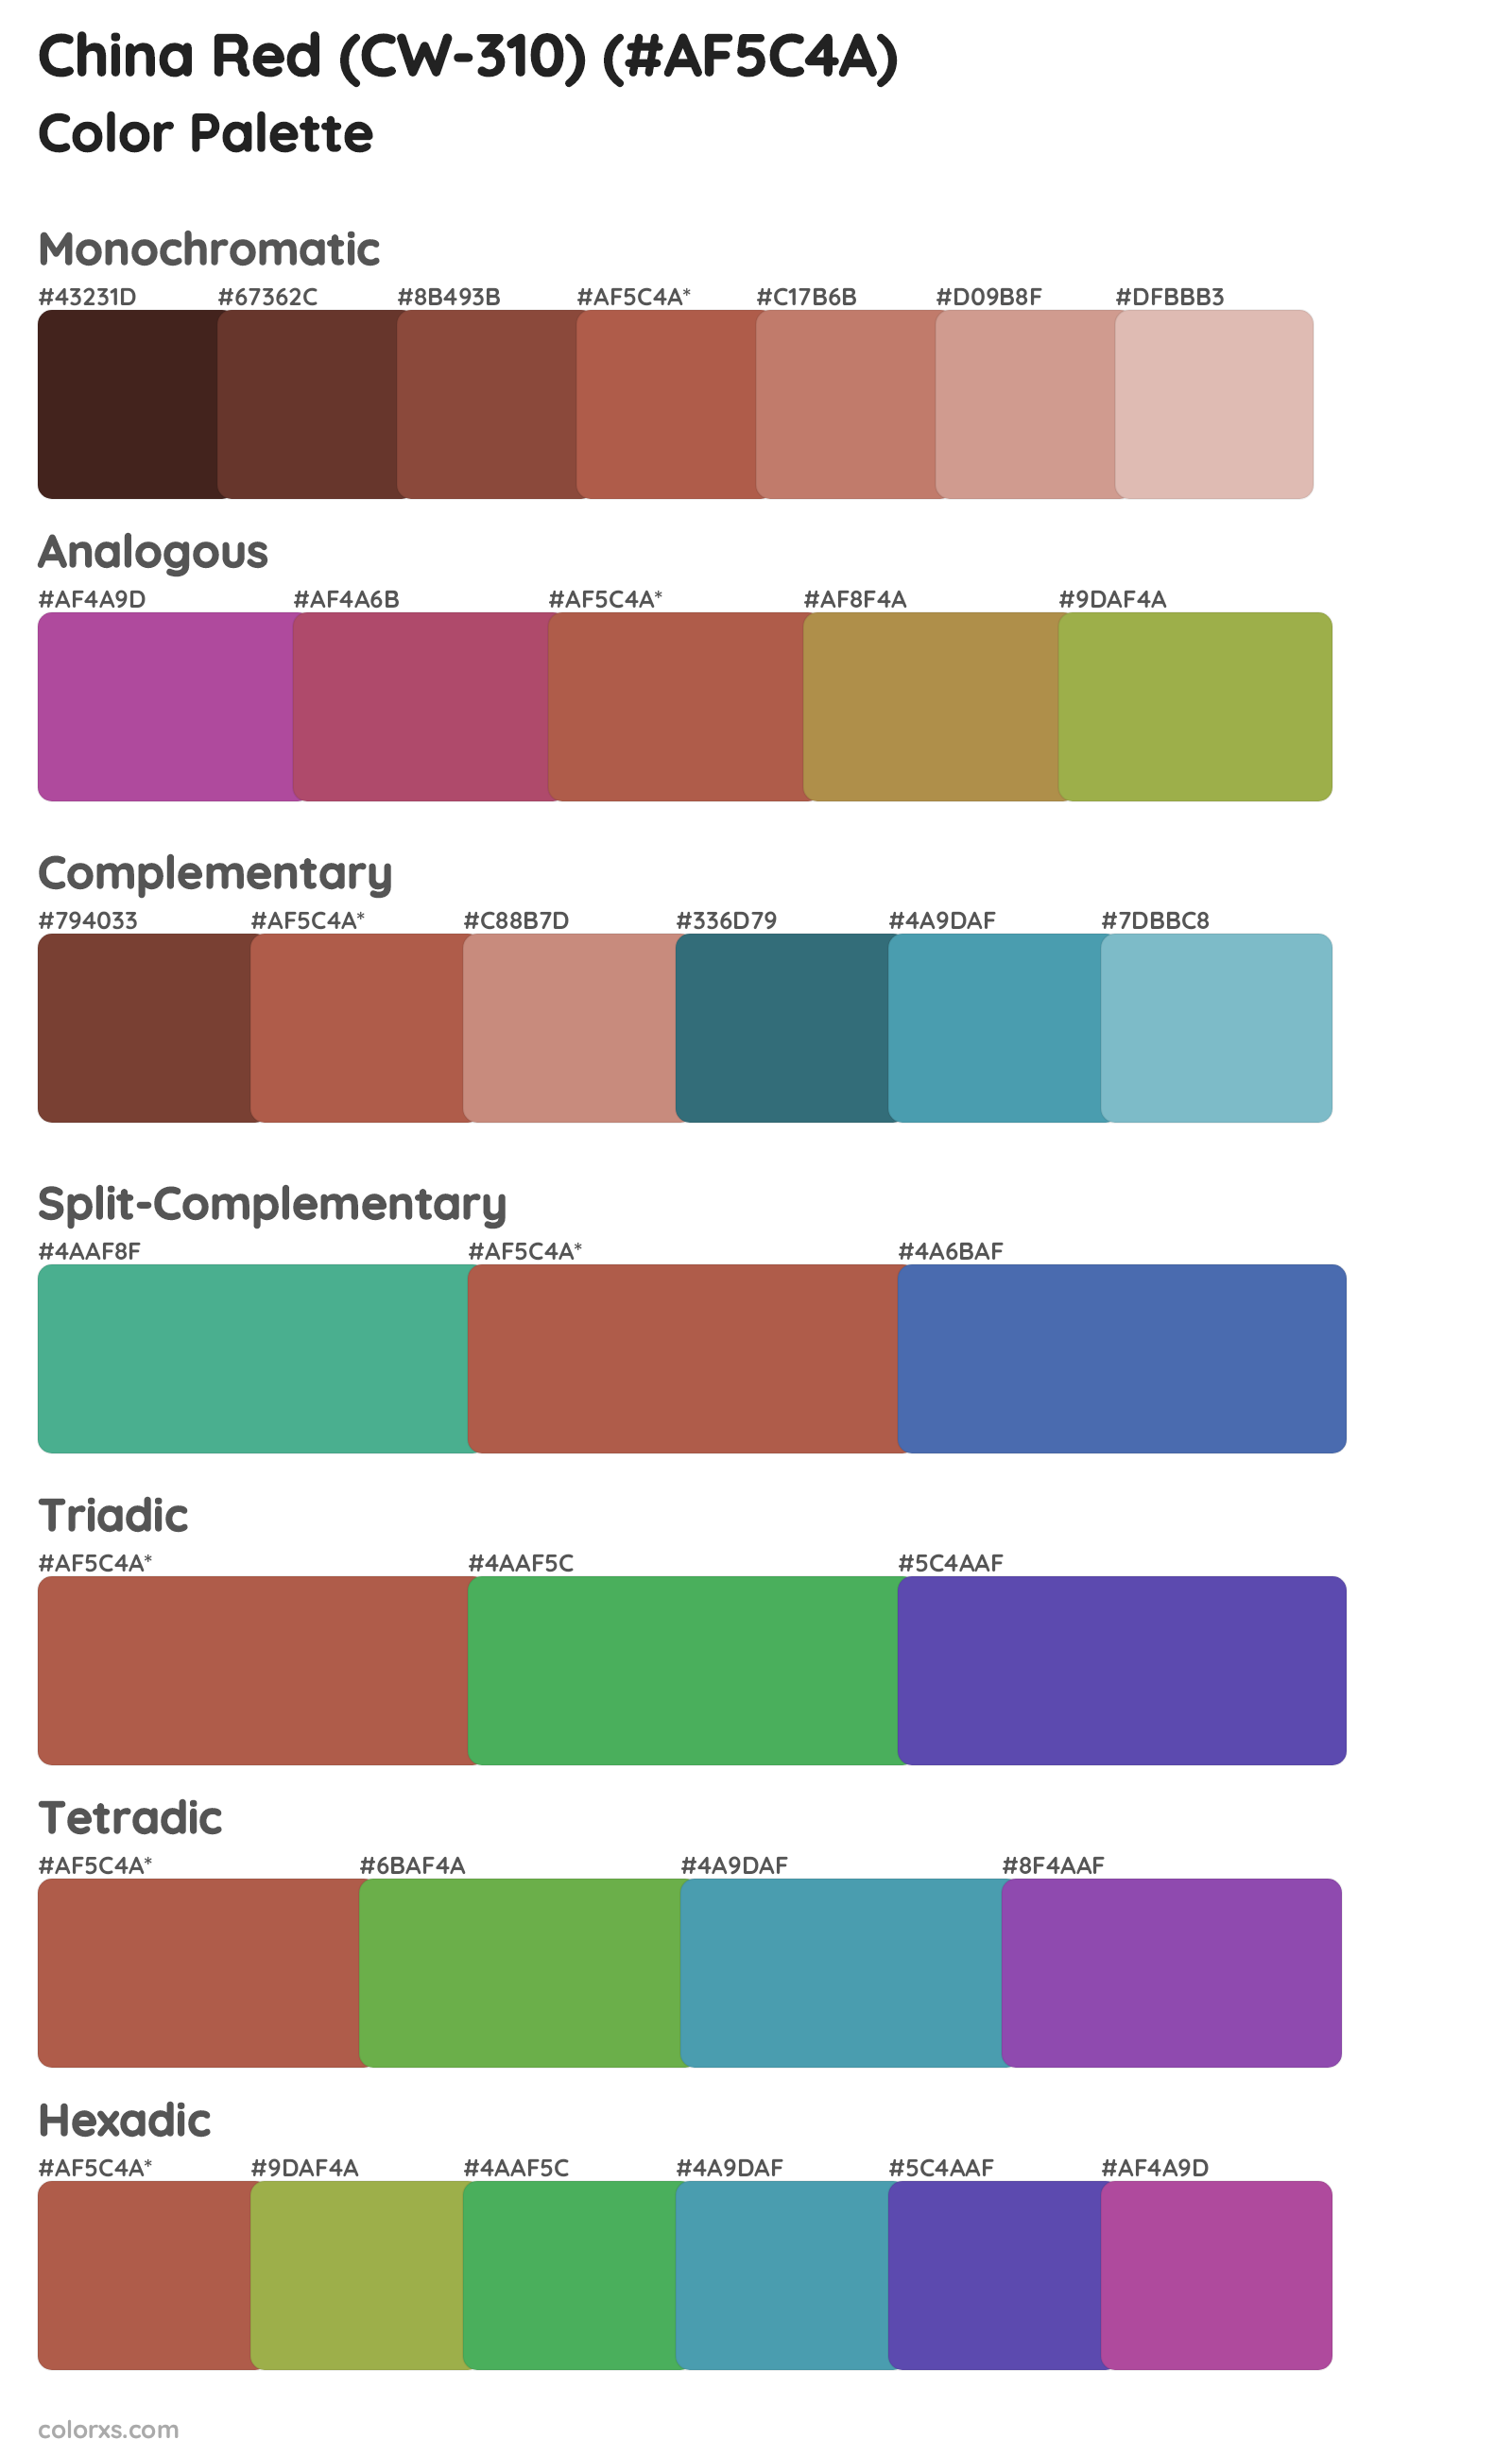 China Red (CW-310) Color Scheme Palettes